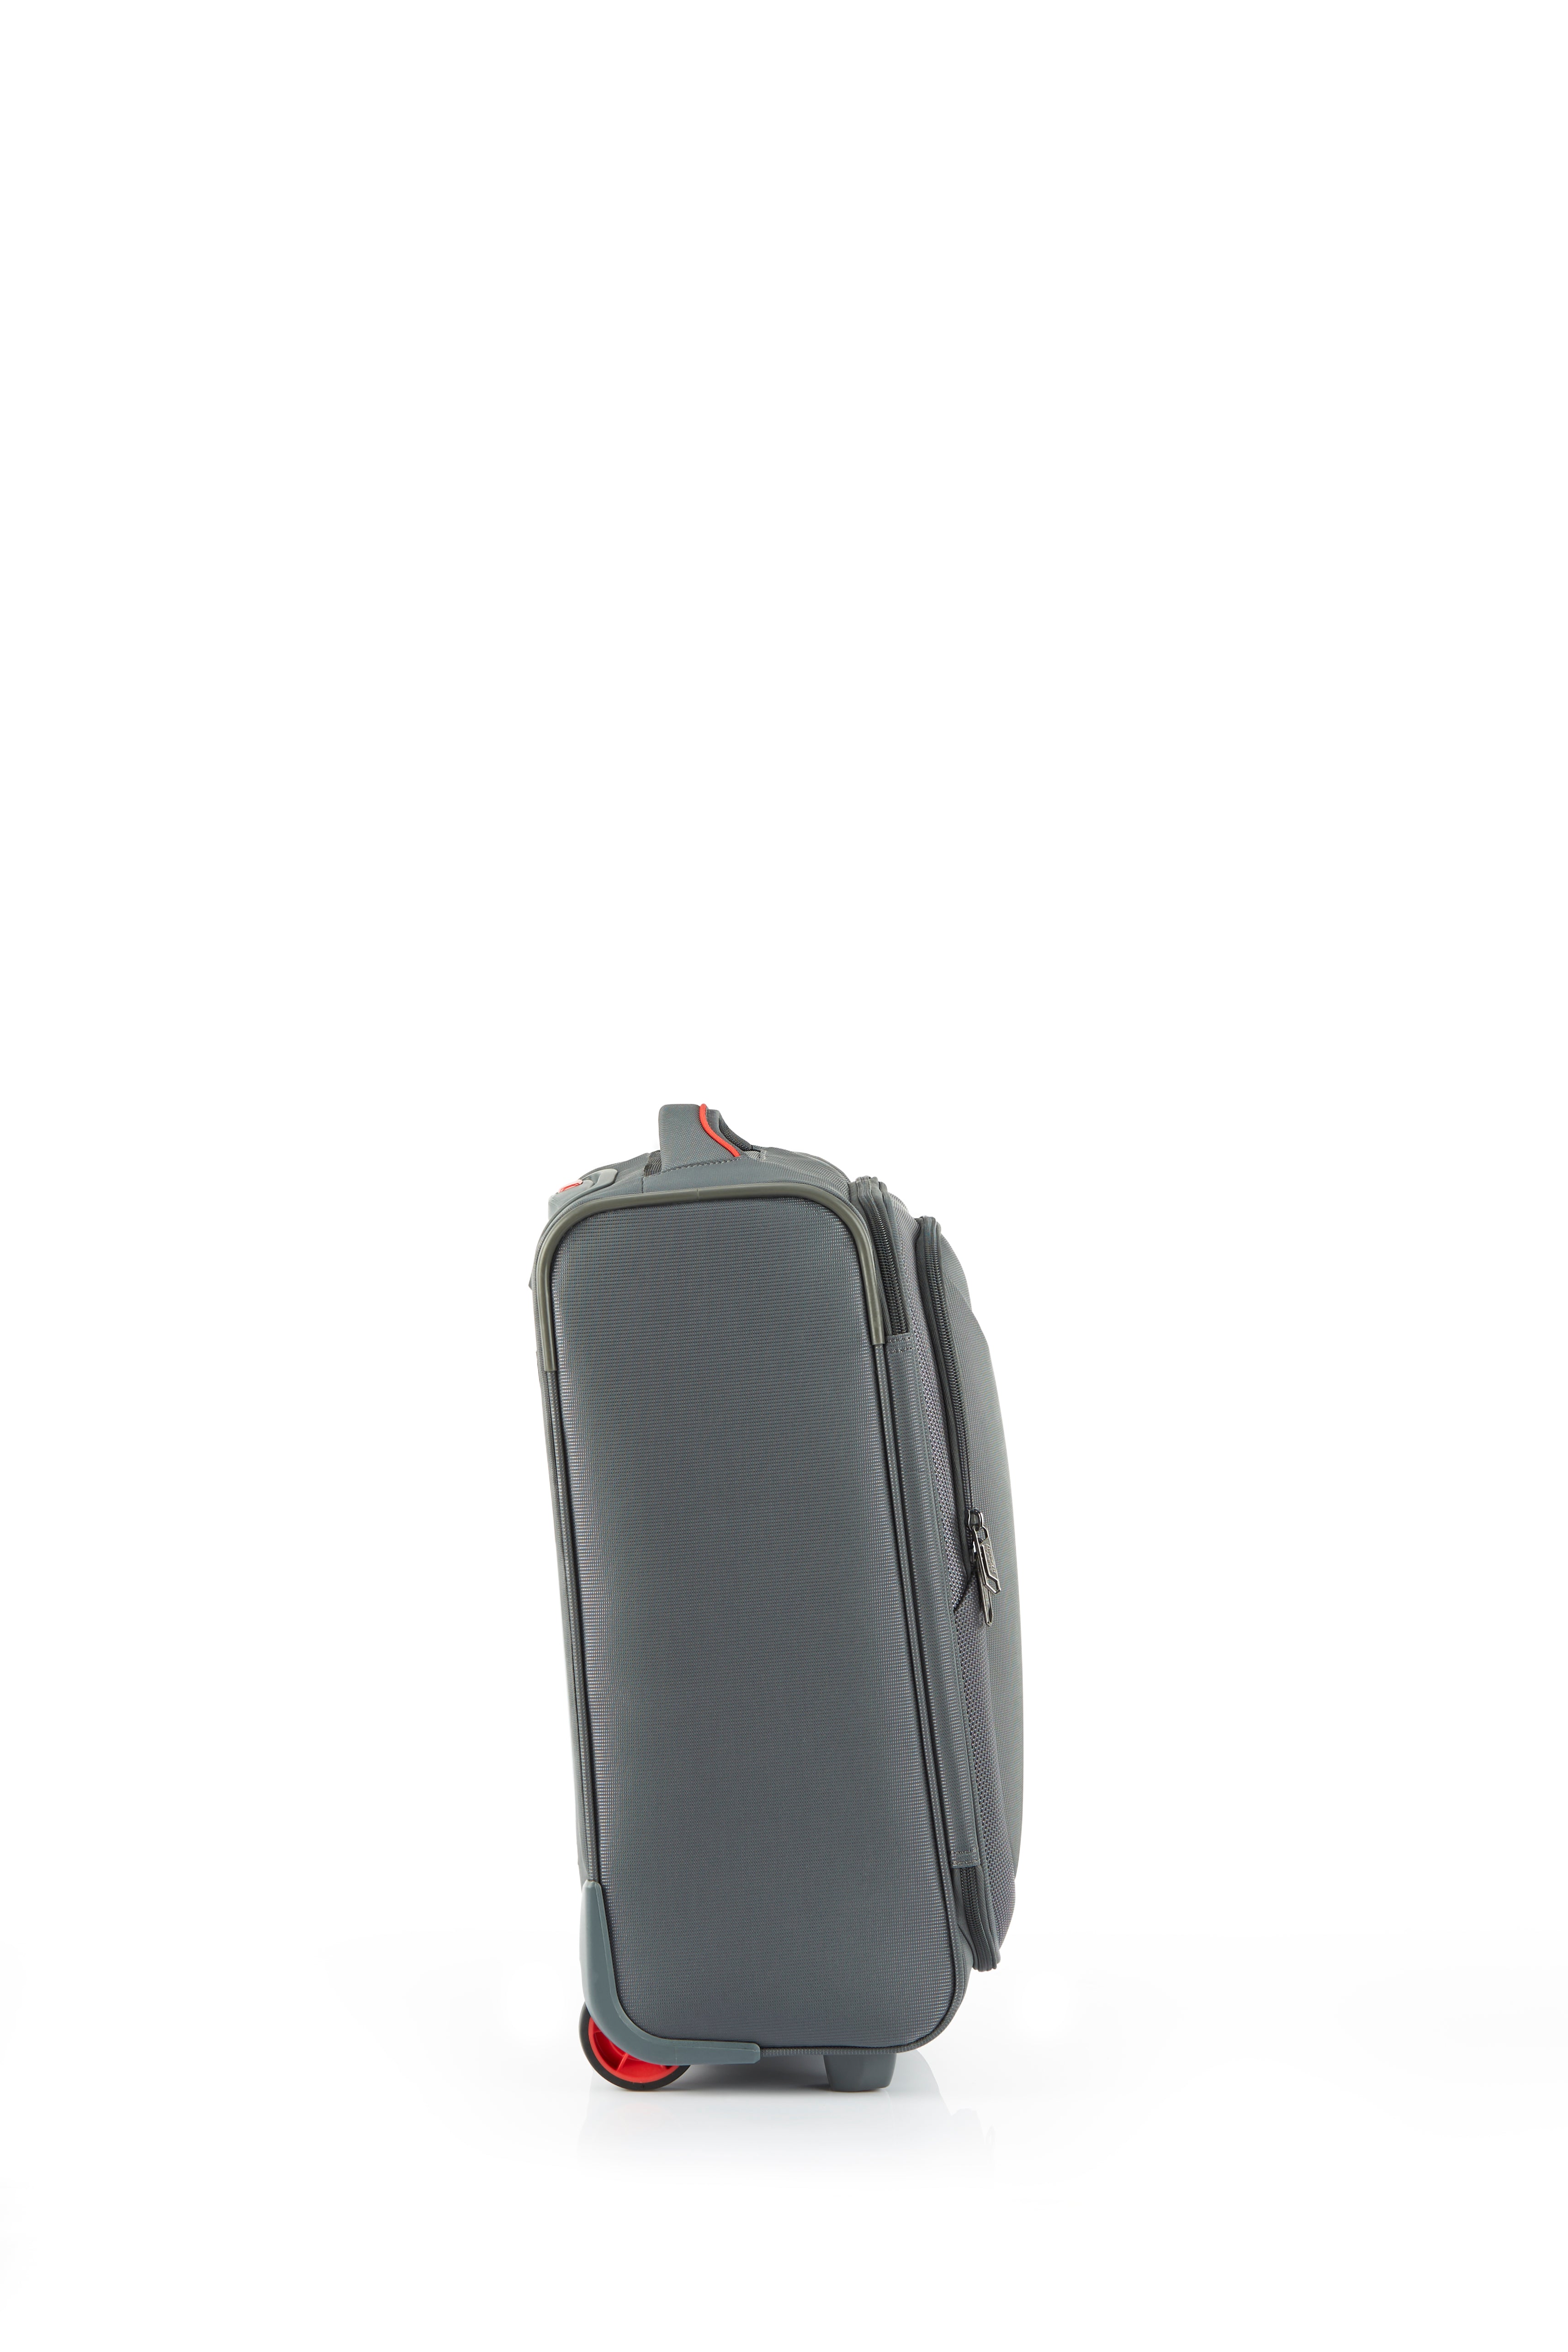 American Tourister - Applite ECO 50cm Small Suitcase - Grey/Red-3